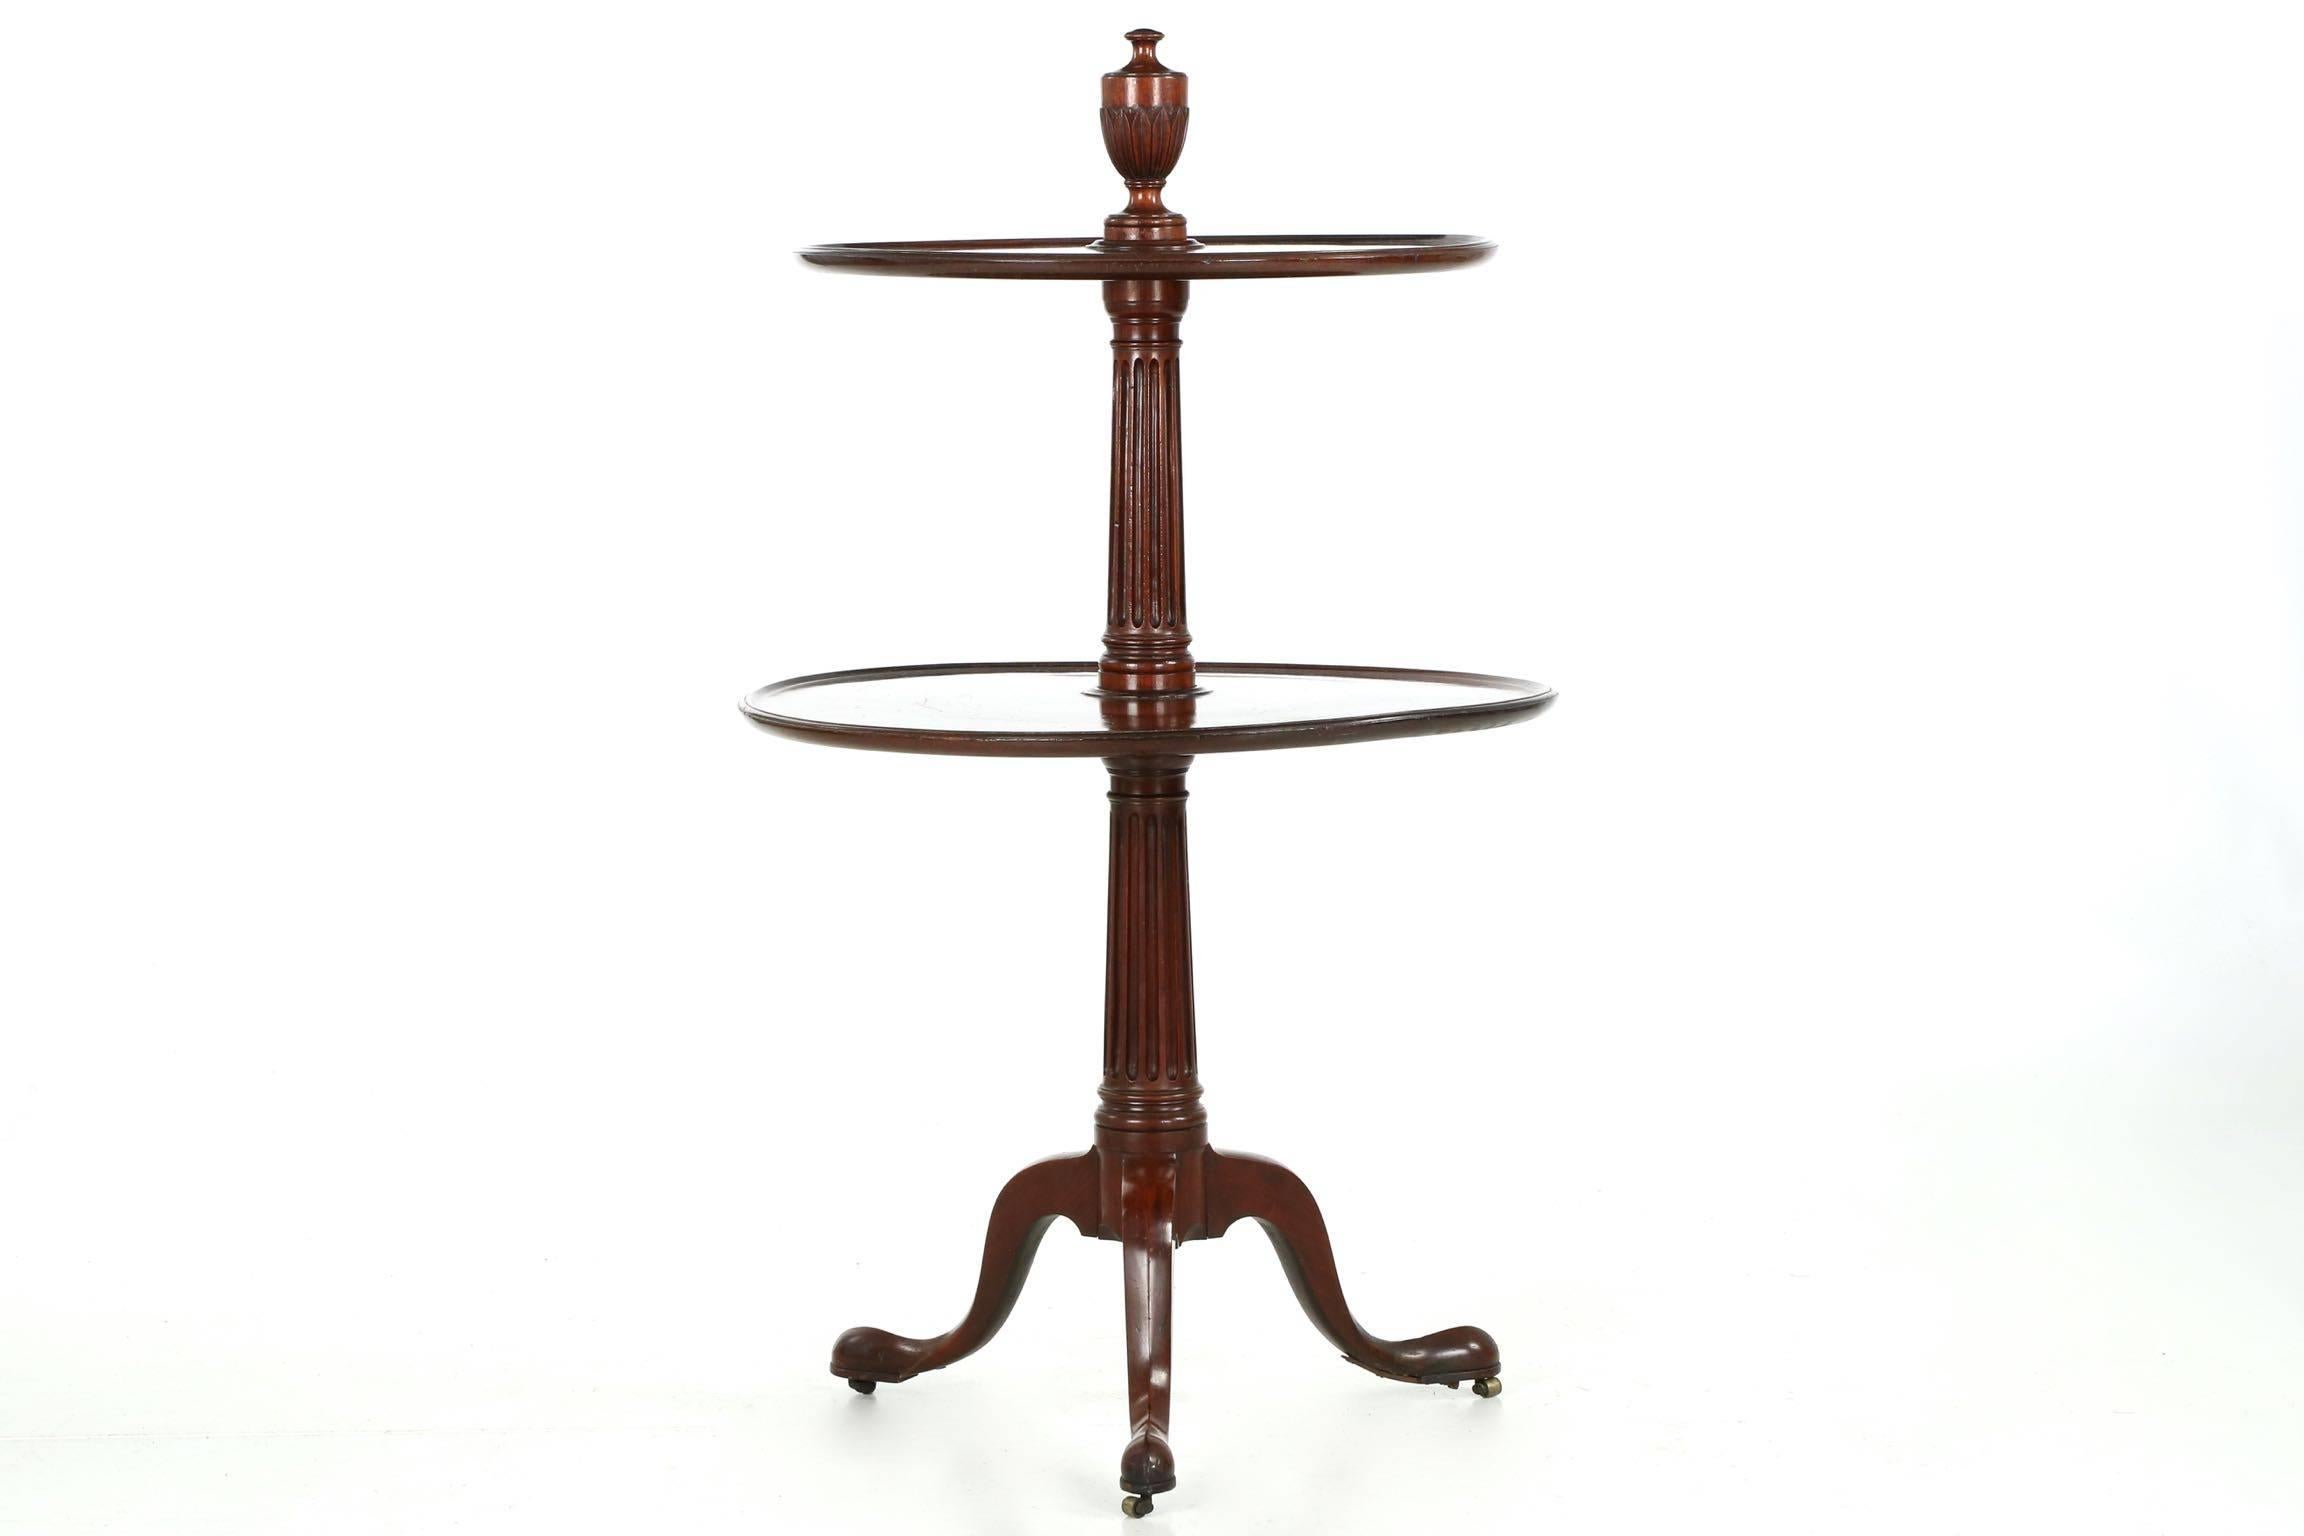 A finely designed and executed dumbwaiter table, this example is particularly nice with it’s crisply carved waterleaf urn-finial on the top level. Perfectly formed from a solid block of mahogany, the urn elevates the table above it’s peers